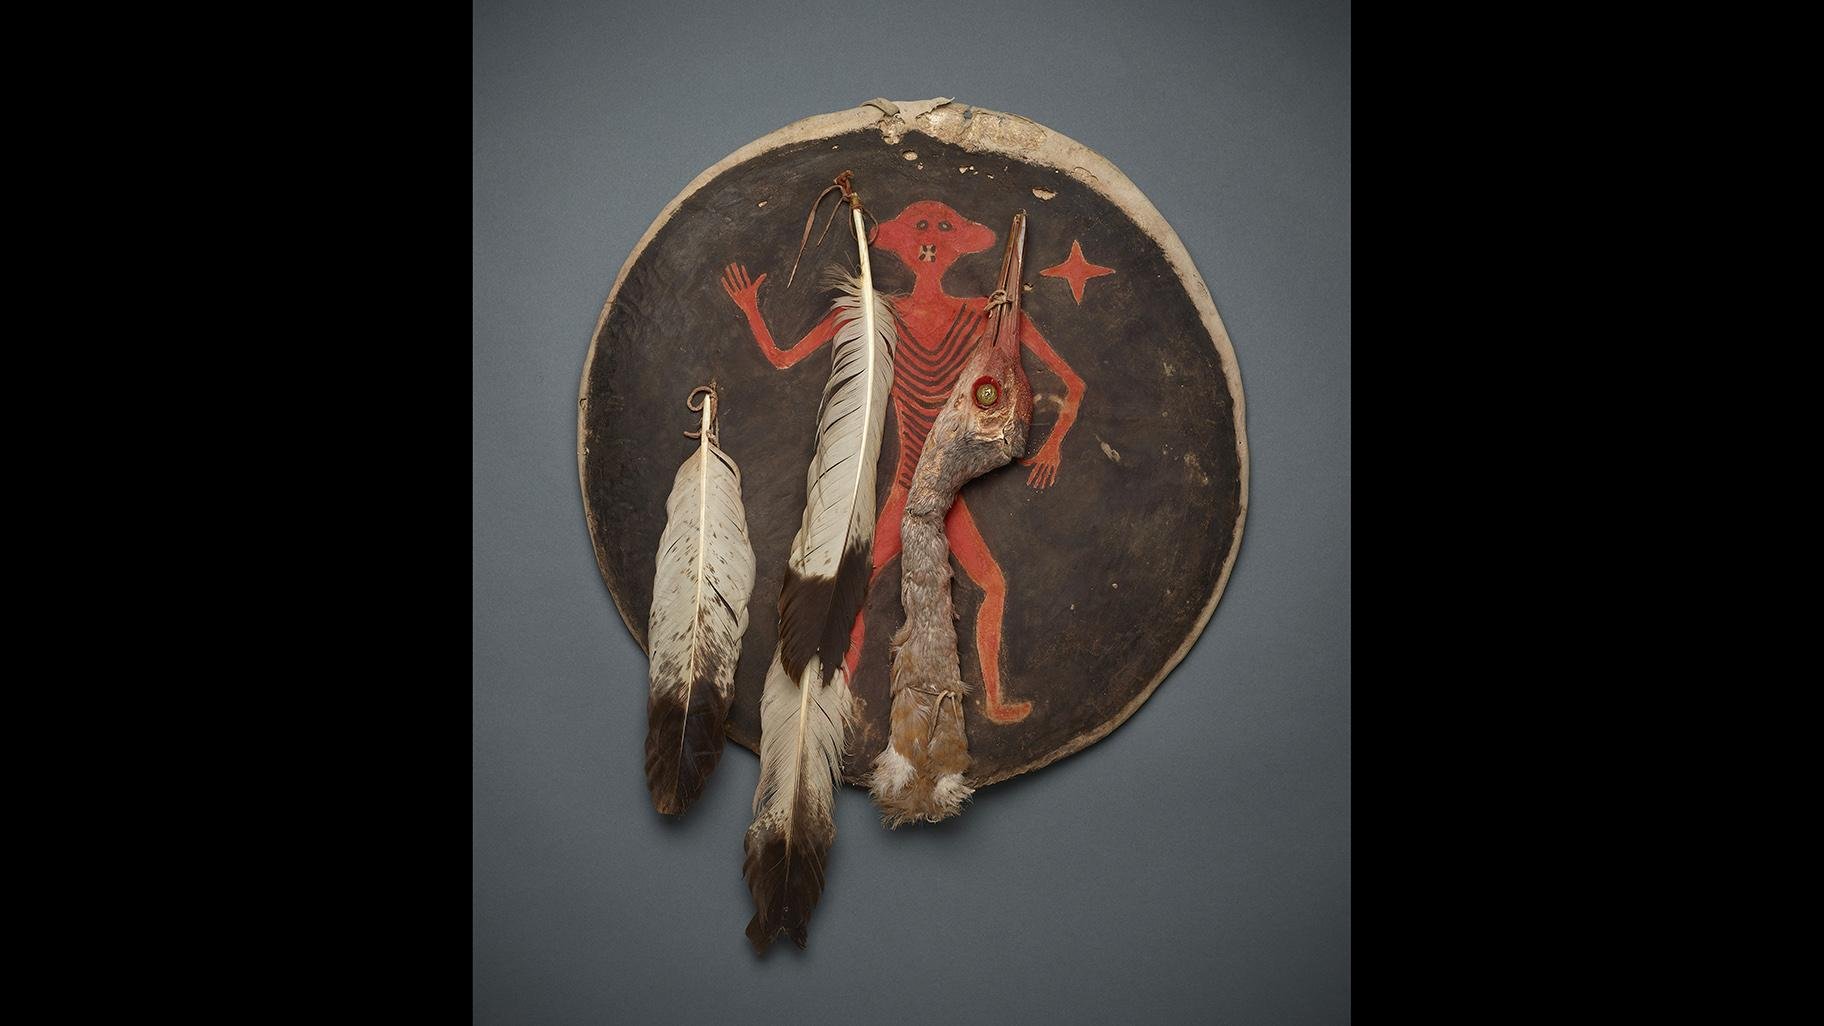 A war shield owned by Chíischipaaliash, or Wraps His Tail (John Weinstein / Field Museum)